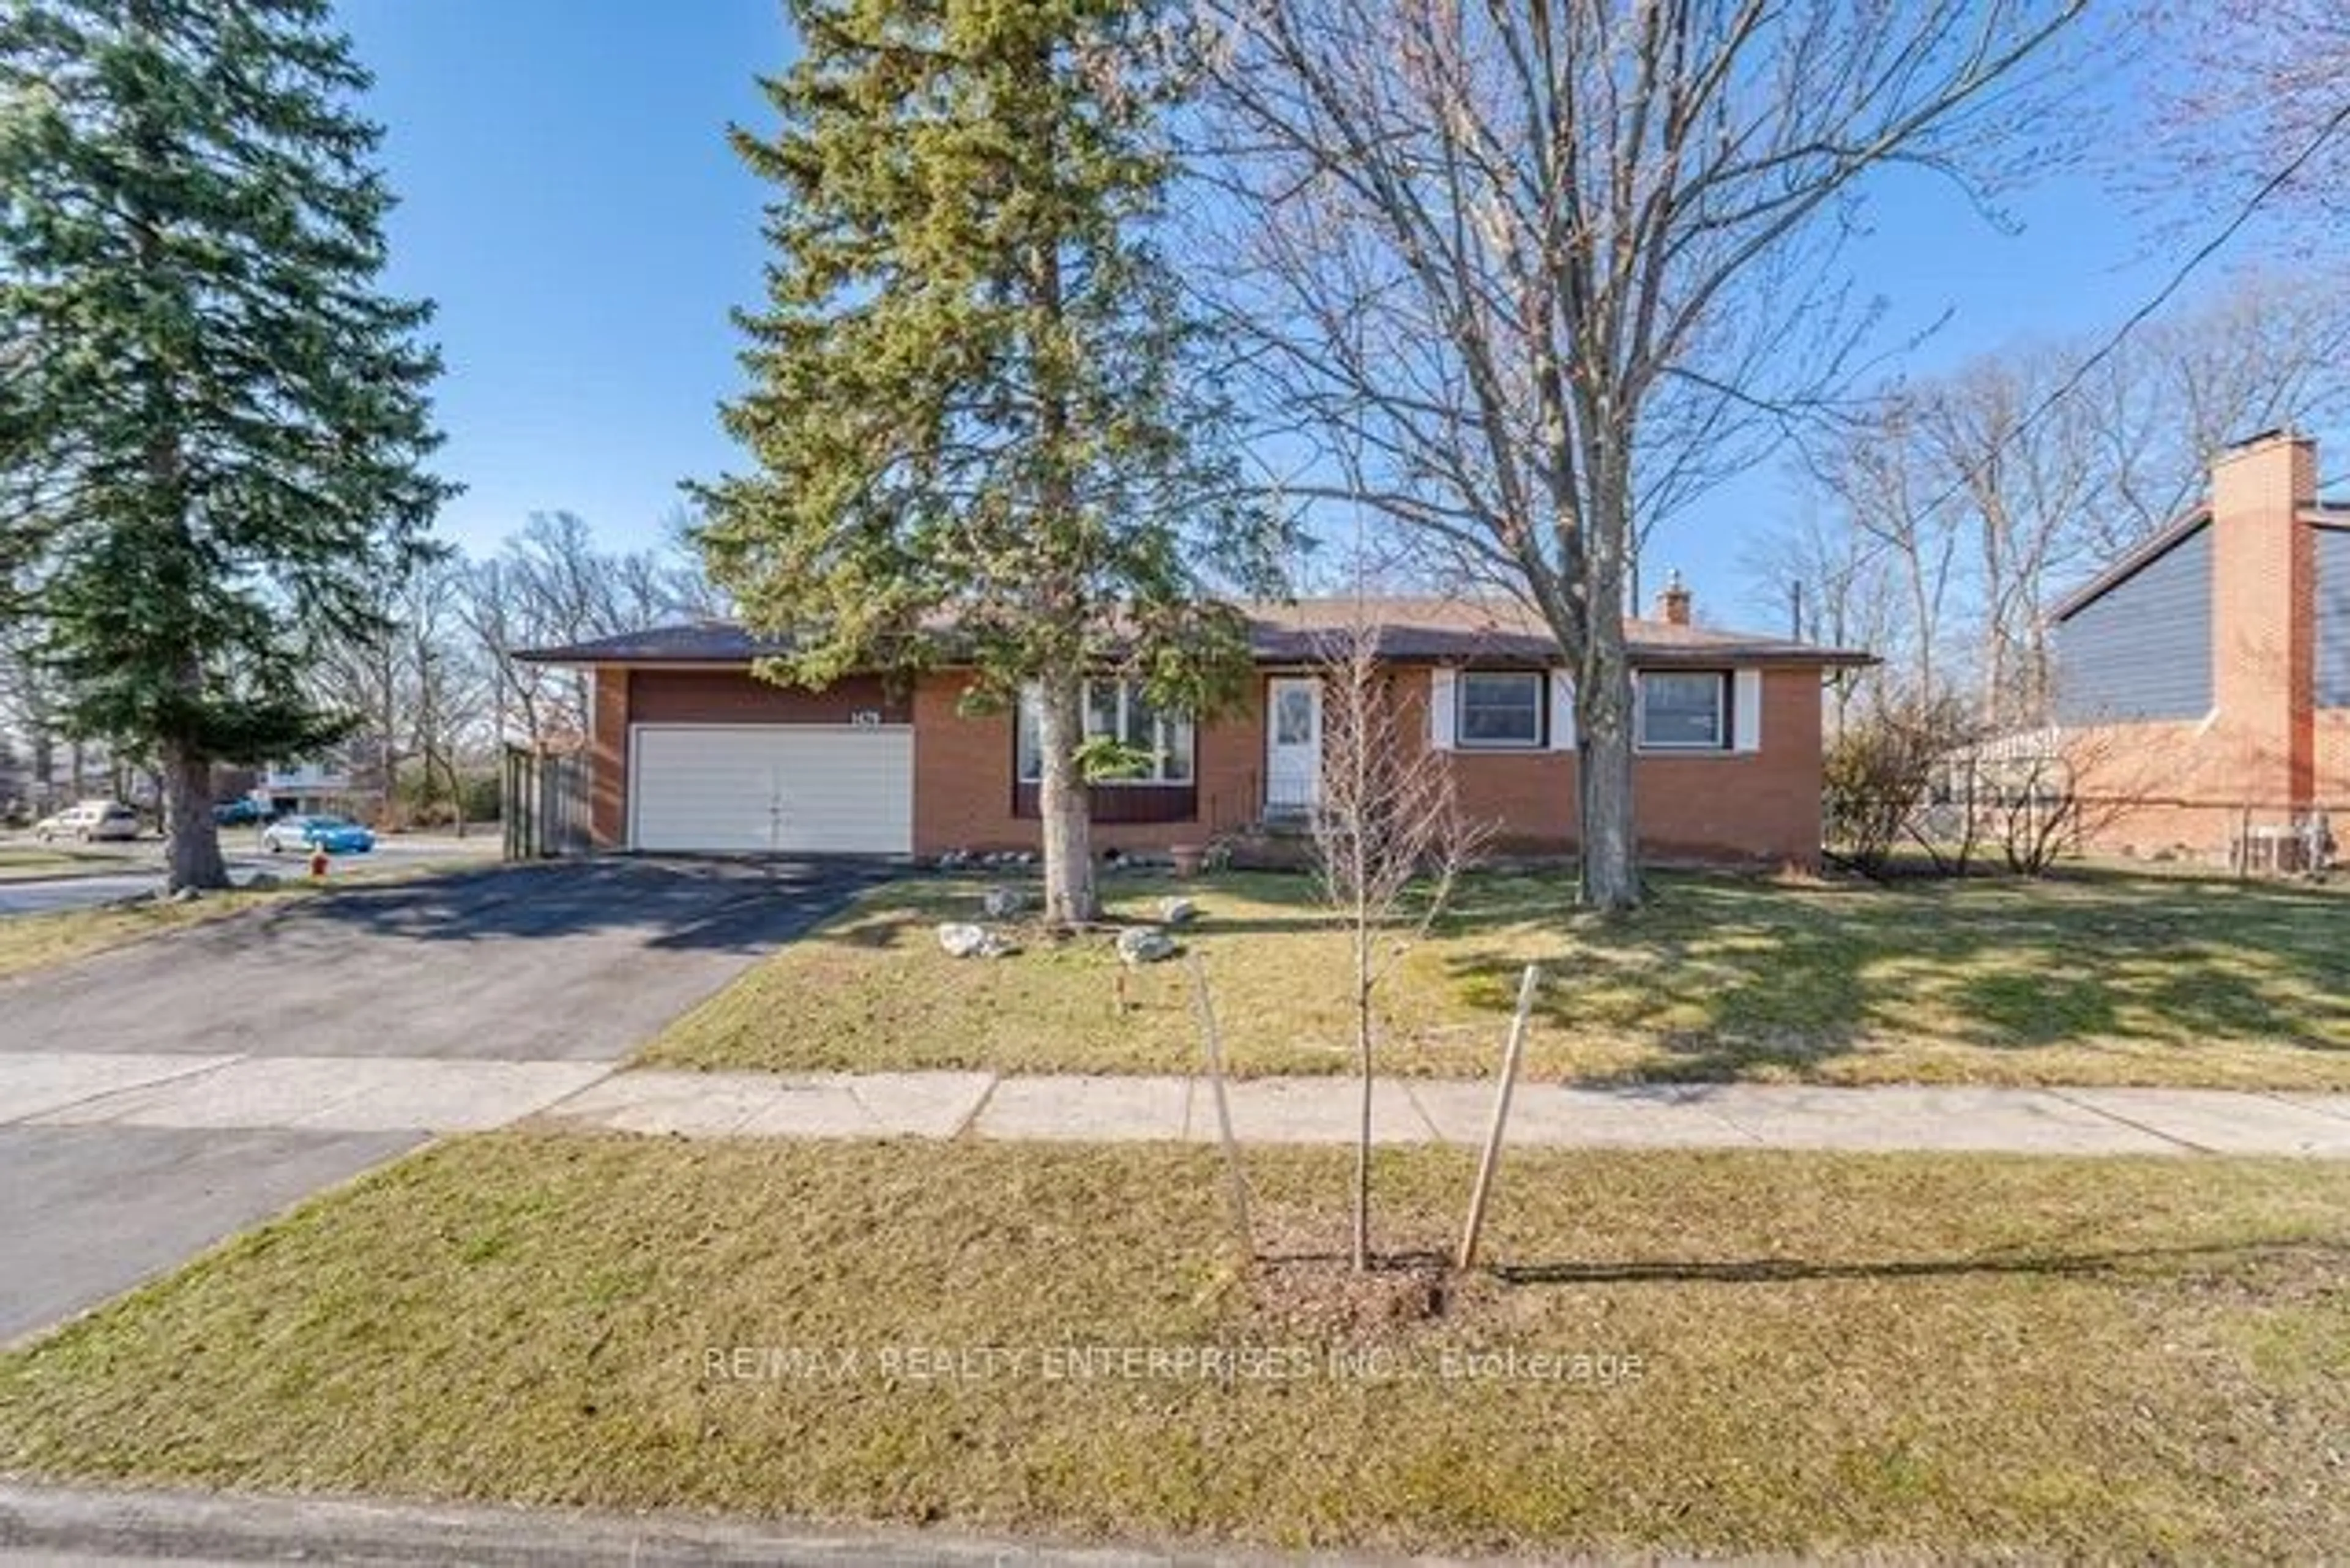 Frontside or backside of a home for 1478 Wise Ave, Burlington Ontario L7P 2P8